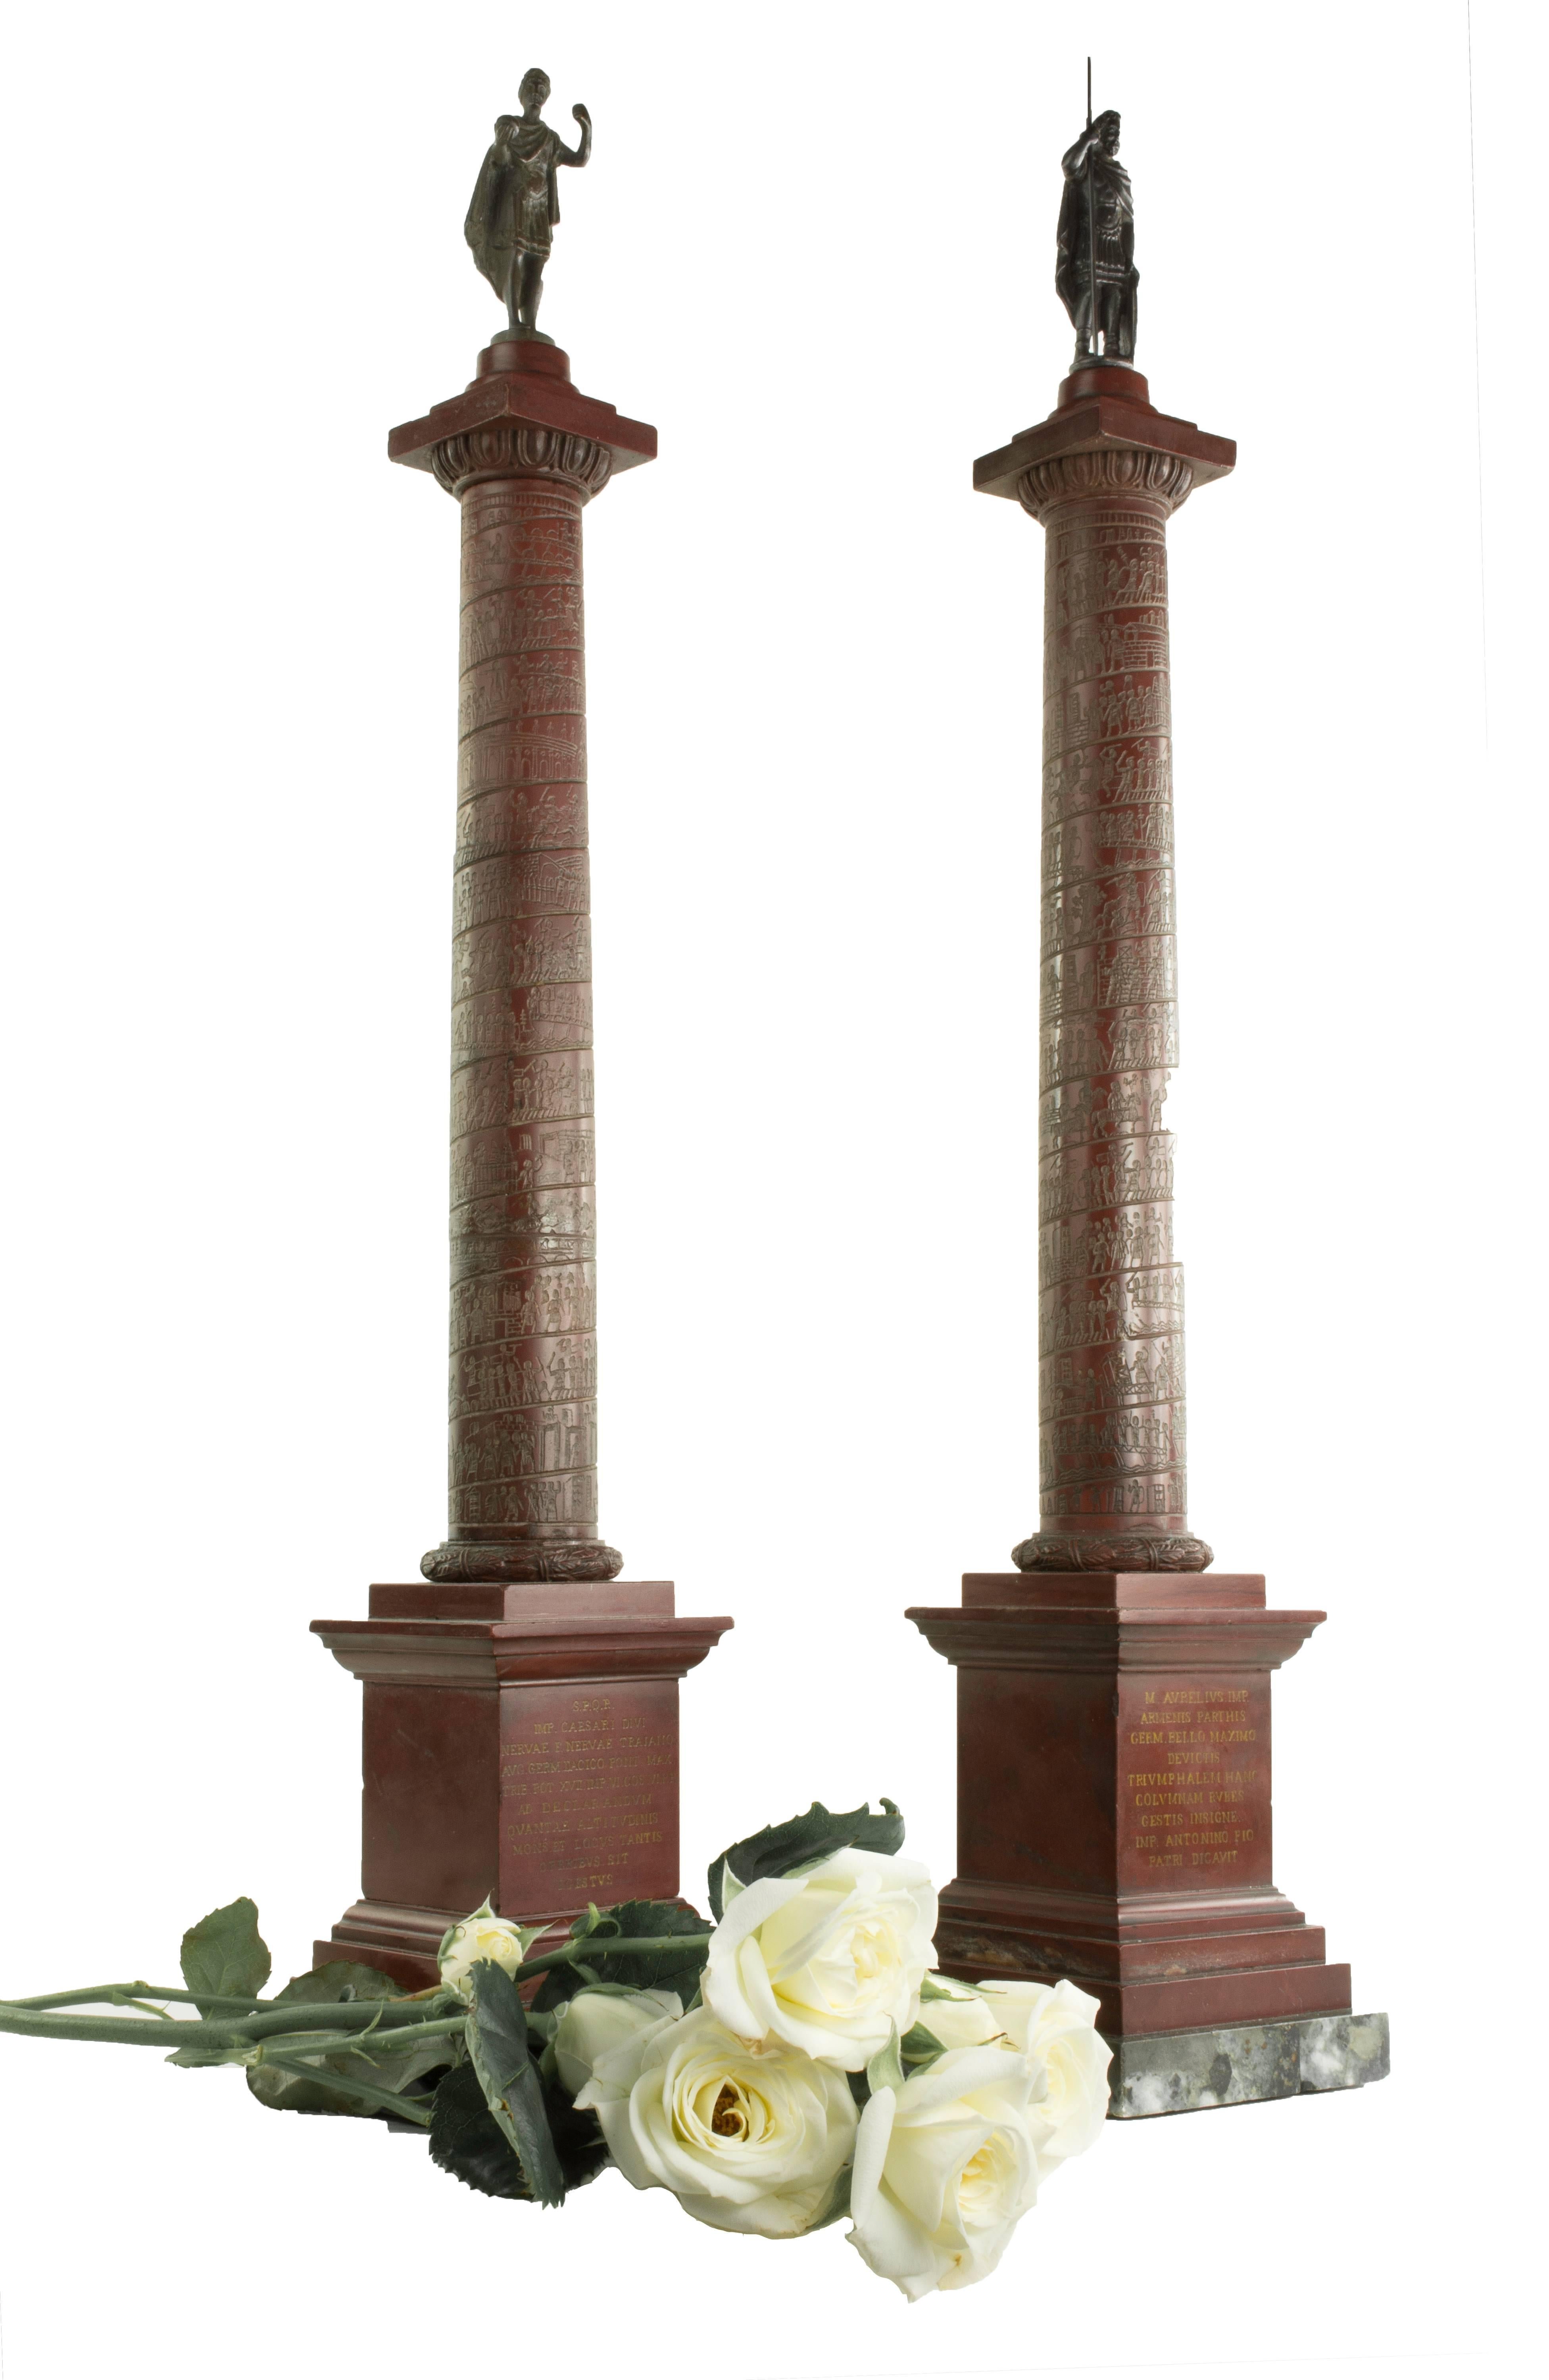 A pair of early 19th century Grand Tour marble architectural models of Roman columns.
Rosso and verde antico marble, with bronze figures.
Rome, circa 1820-1830, measure: 20” H.

The triumphal Columns of Trajan and Marcus Aurelius, erected in Rome in